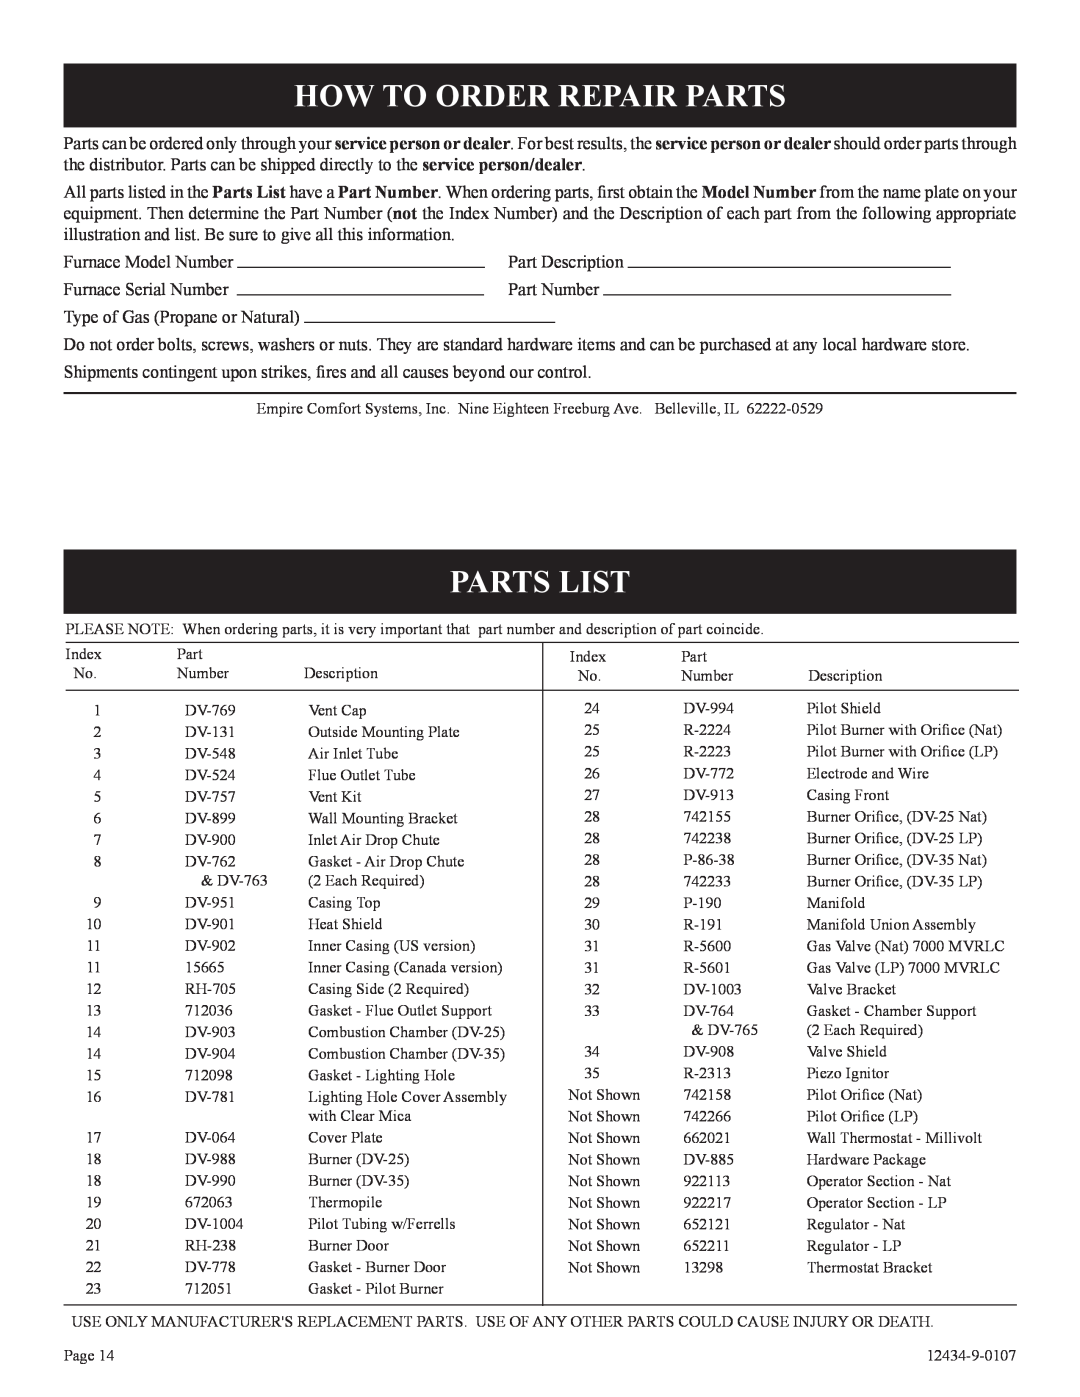 Empire Comfort Systems DV-35-2SG installation instructions How To Order Repair Parts, Parts List 